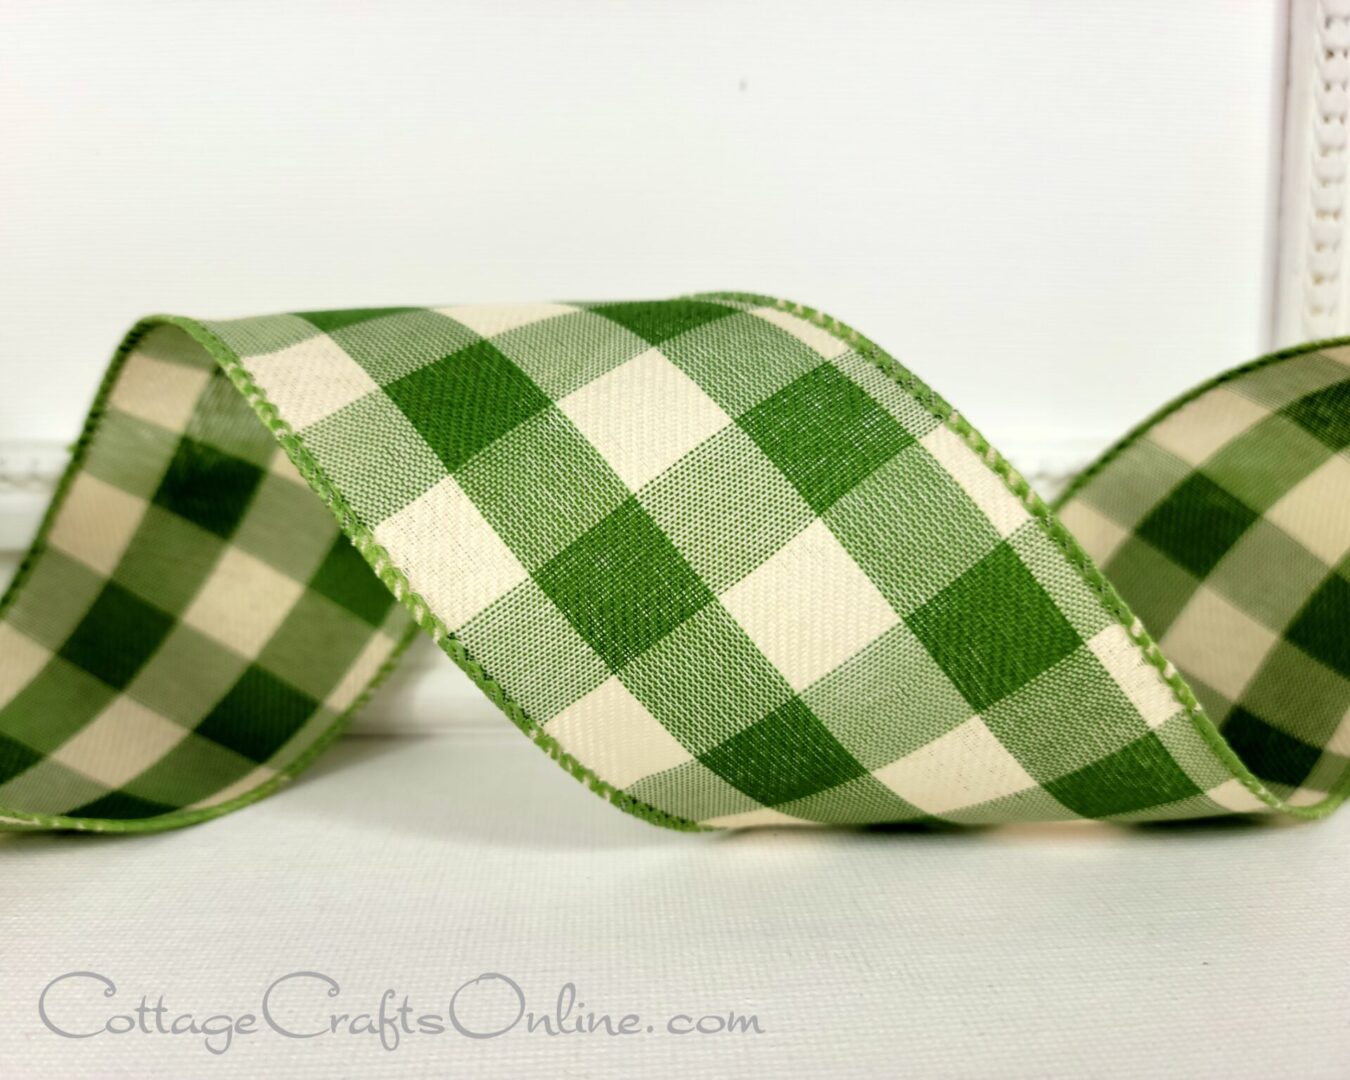 Plaid moss dark olive green ivory check 2.5" wide wired ribbon from the Etsy shop of Cottage Crafts Online.